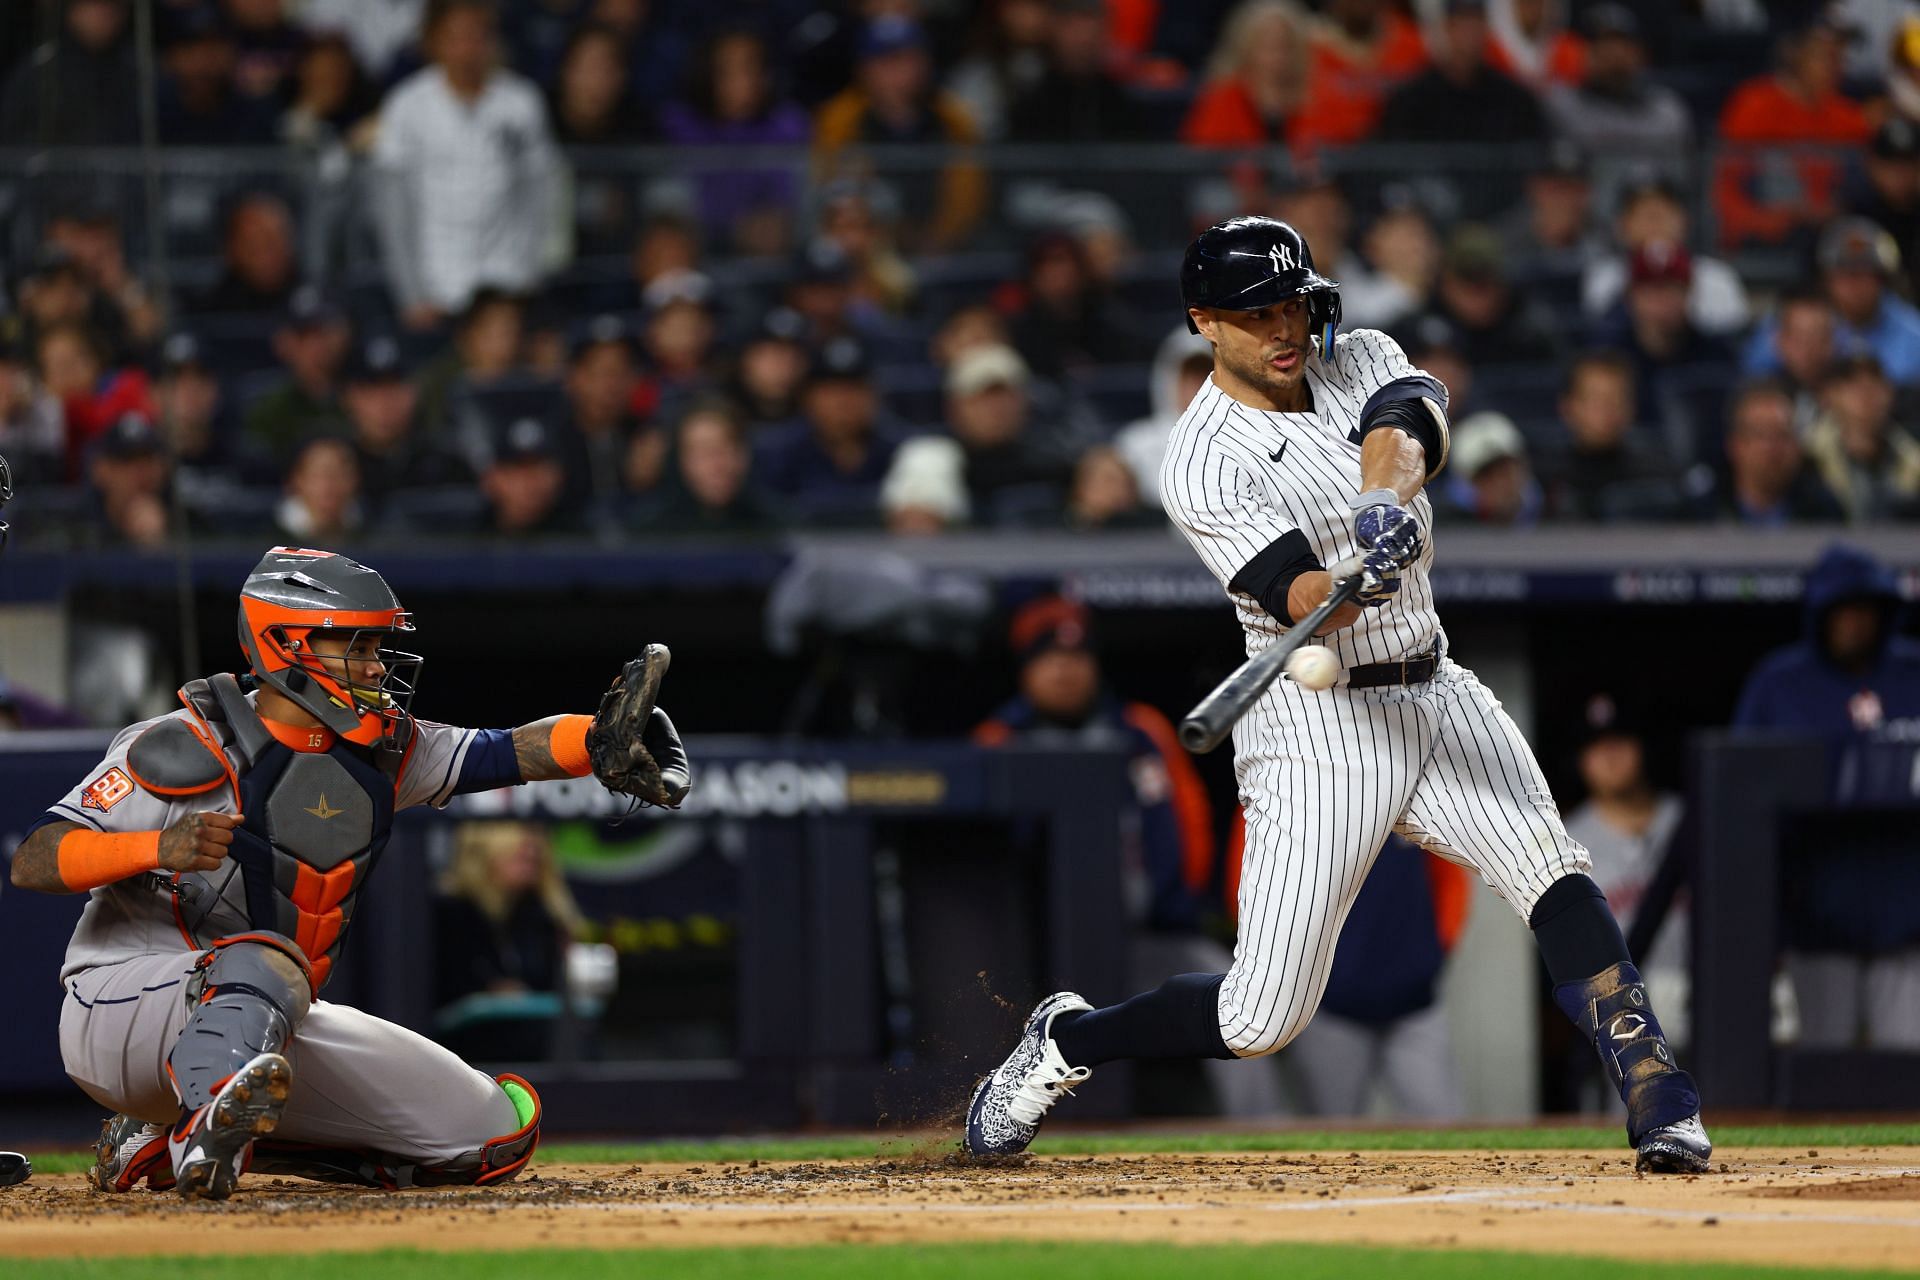 Giancarlo Stanton won't play outfield early in 2021 season